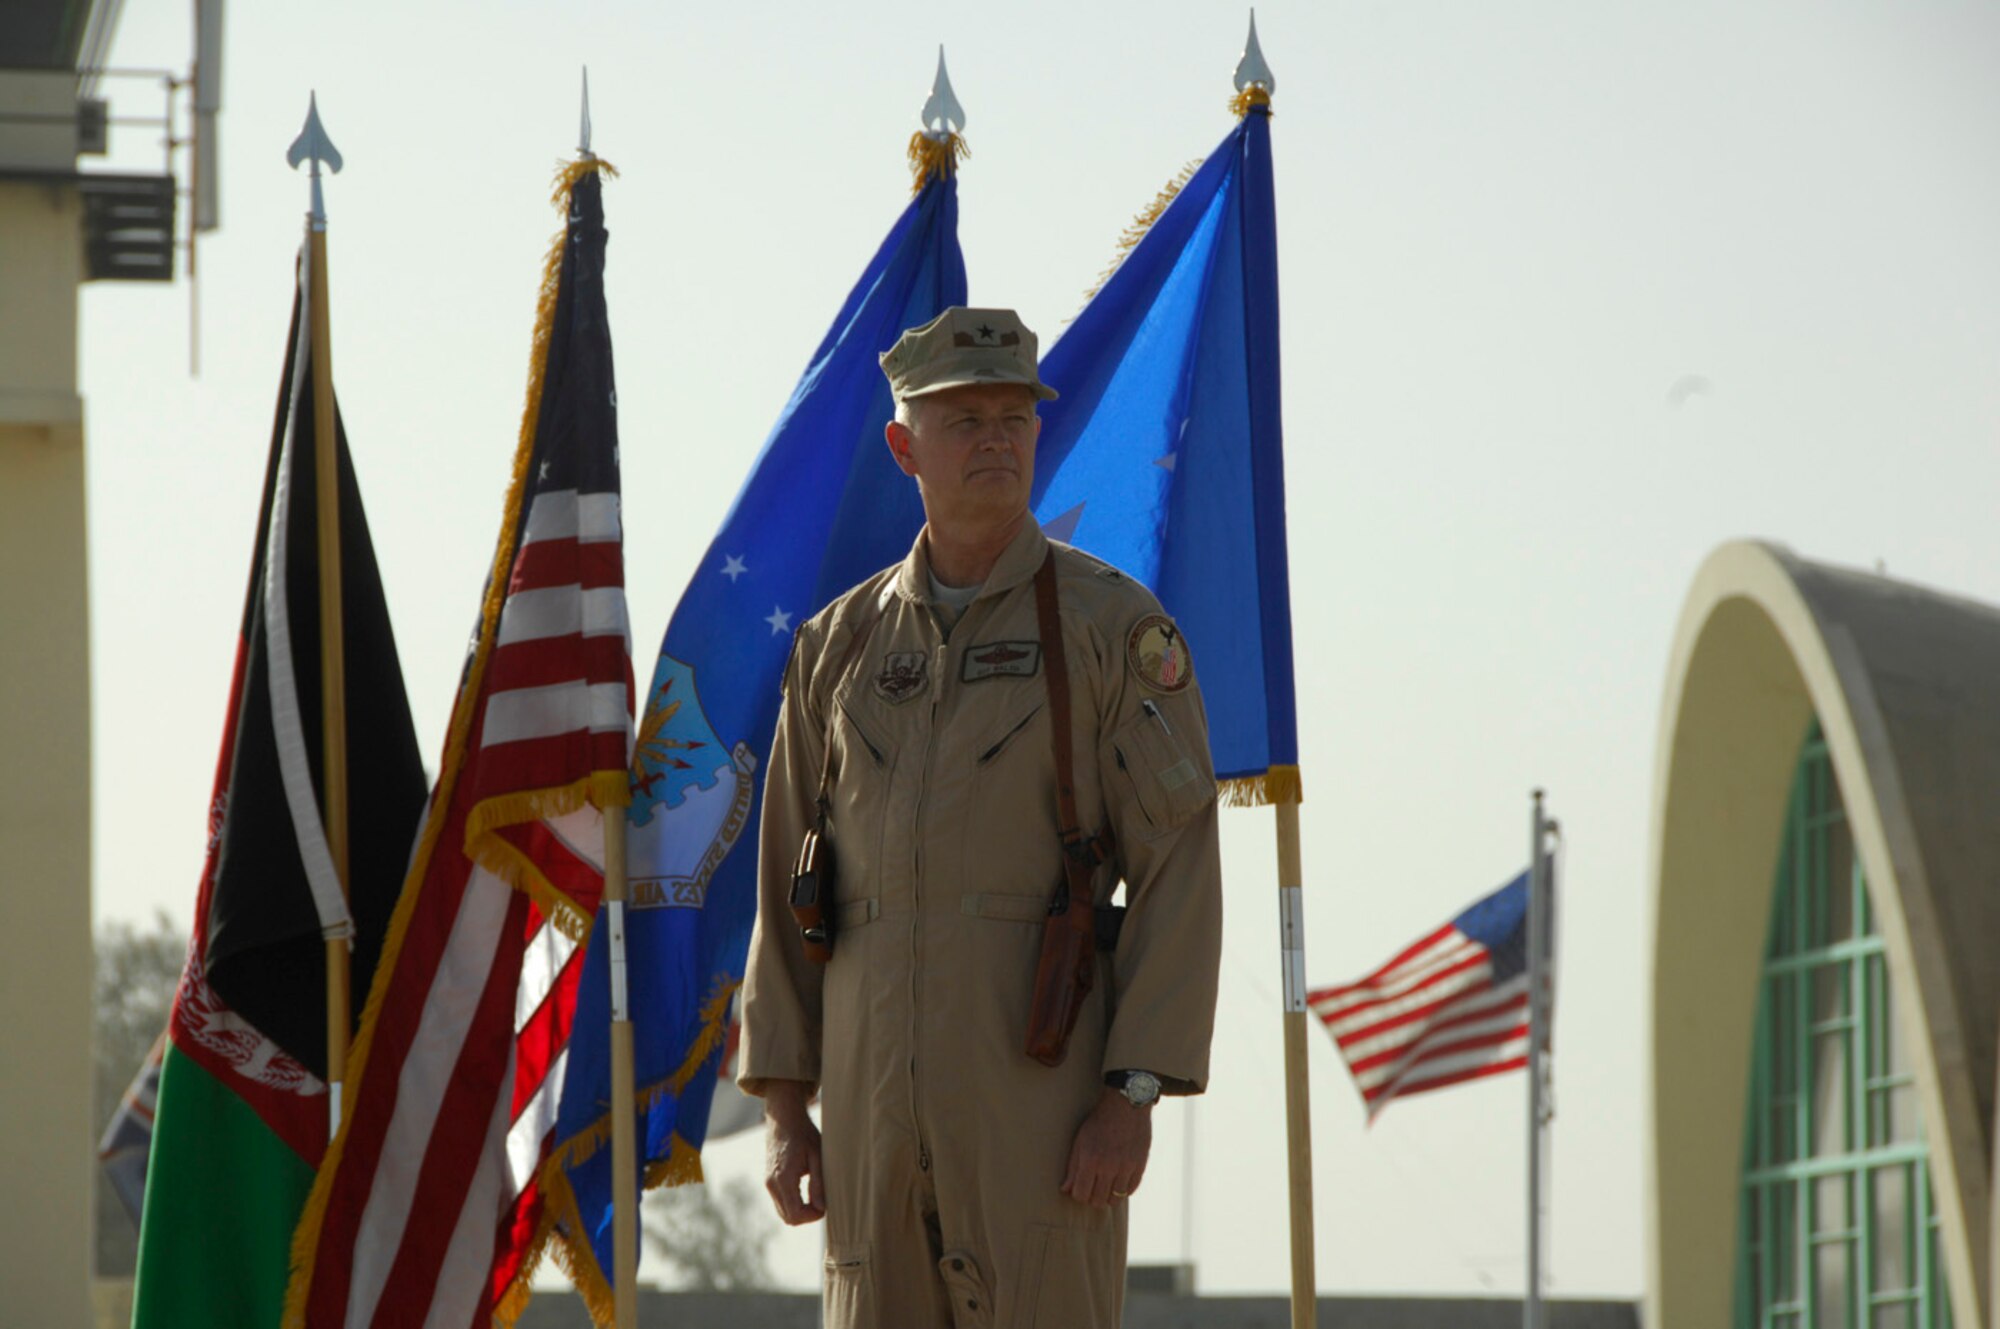 KANDAHAR AIRFIELD, Afghanistan - Brigadier General Guy M. Walsh stands ready to give his first remarks as the new Wing commander for the 451st Air Expeditionary Wing here after an assumption of command and activation ceremony July 2, 2009.  The 451st transitioned from a group to a wing at 7 a.m. as Lt. General Gary L. North, 9th Air Force and Air Forces Central commander, handed Gen. Walsh the guidon.  General Walsh was the wing commander for the 175th Wing, Maryland Air National Guard, Baltimore, Maryland, before accepting his assignment here.  (U.S. Air Force photo by 1st Lt. Noelle Caldwell)